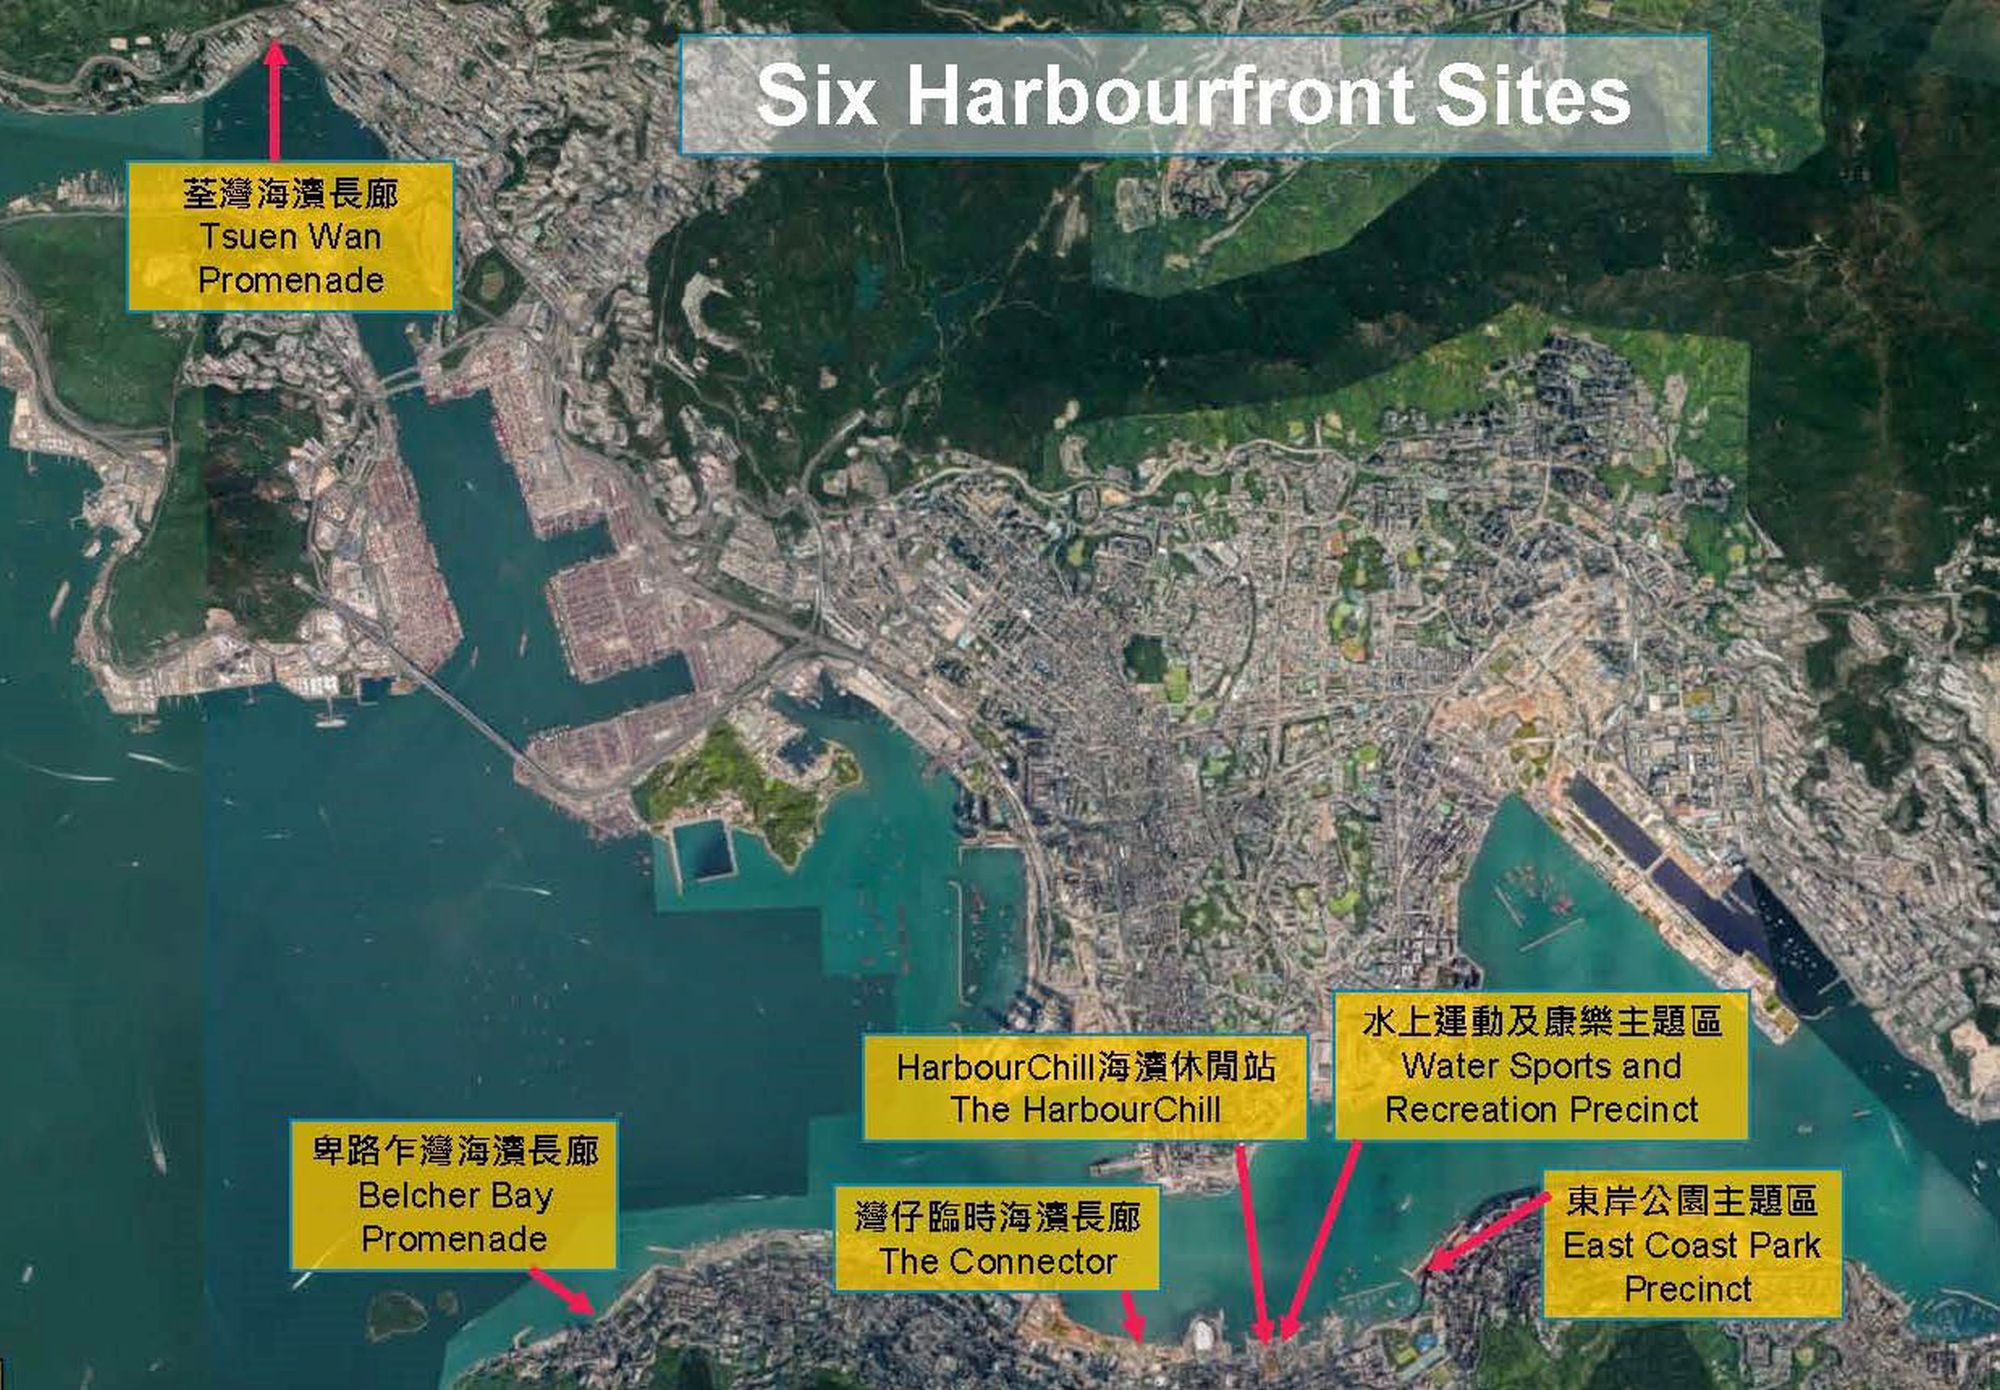 The Development Bureau and the HC have launched the new “pop-up” summer precincts at six harboufront sites as shown in the picture for this summer.